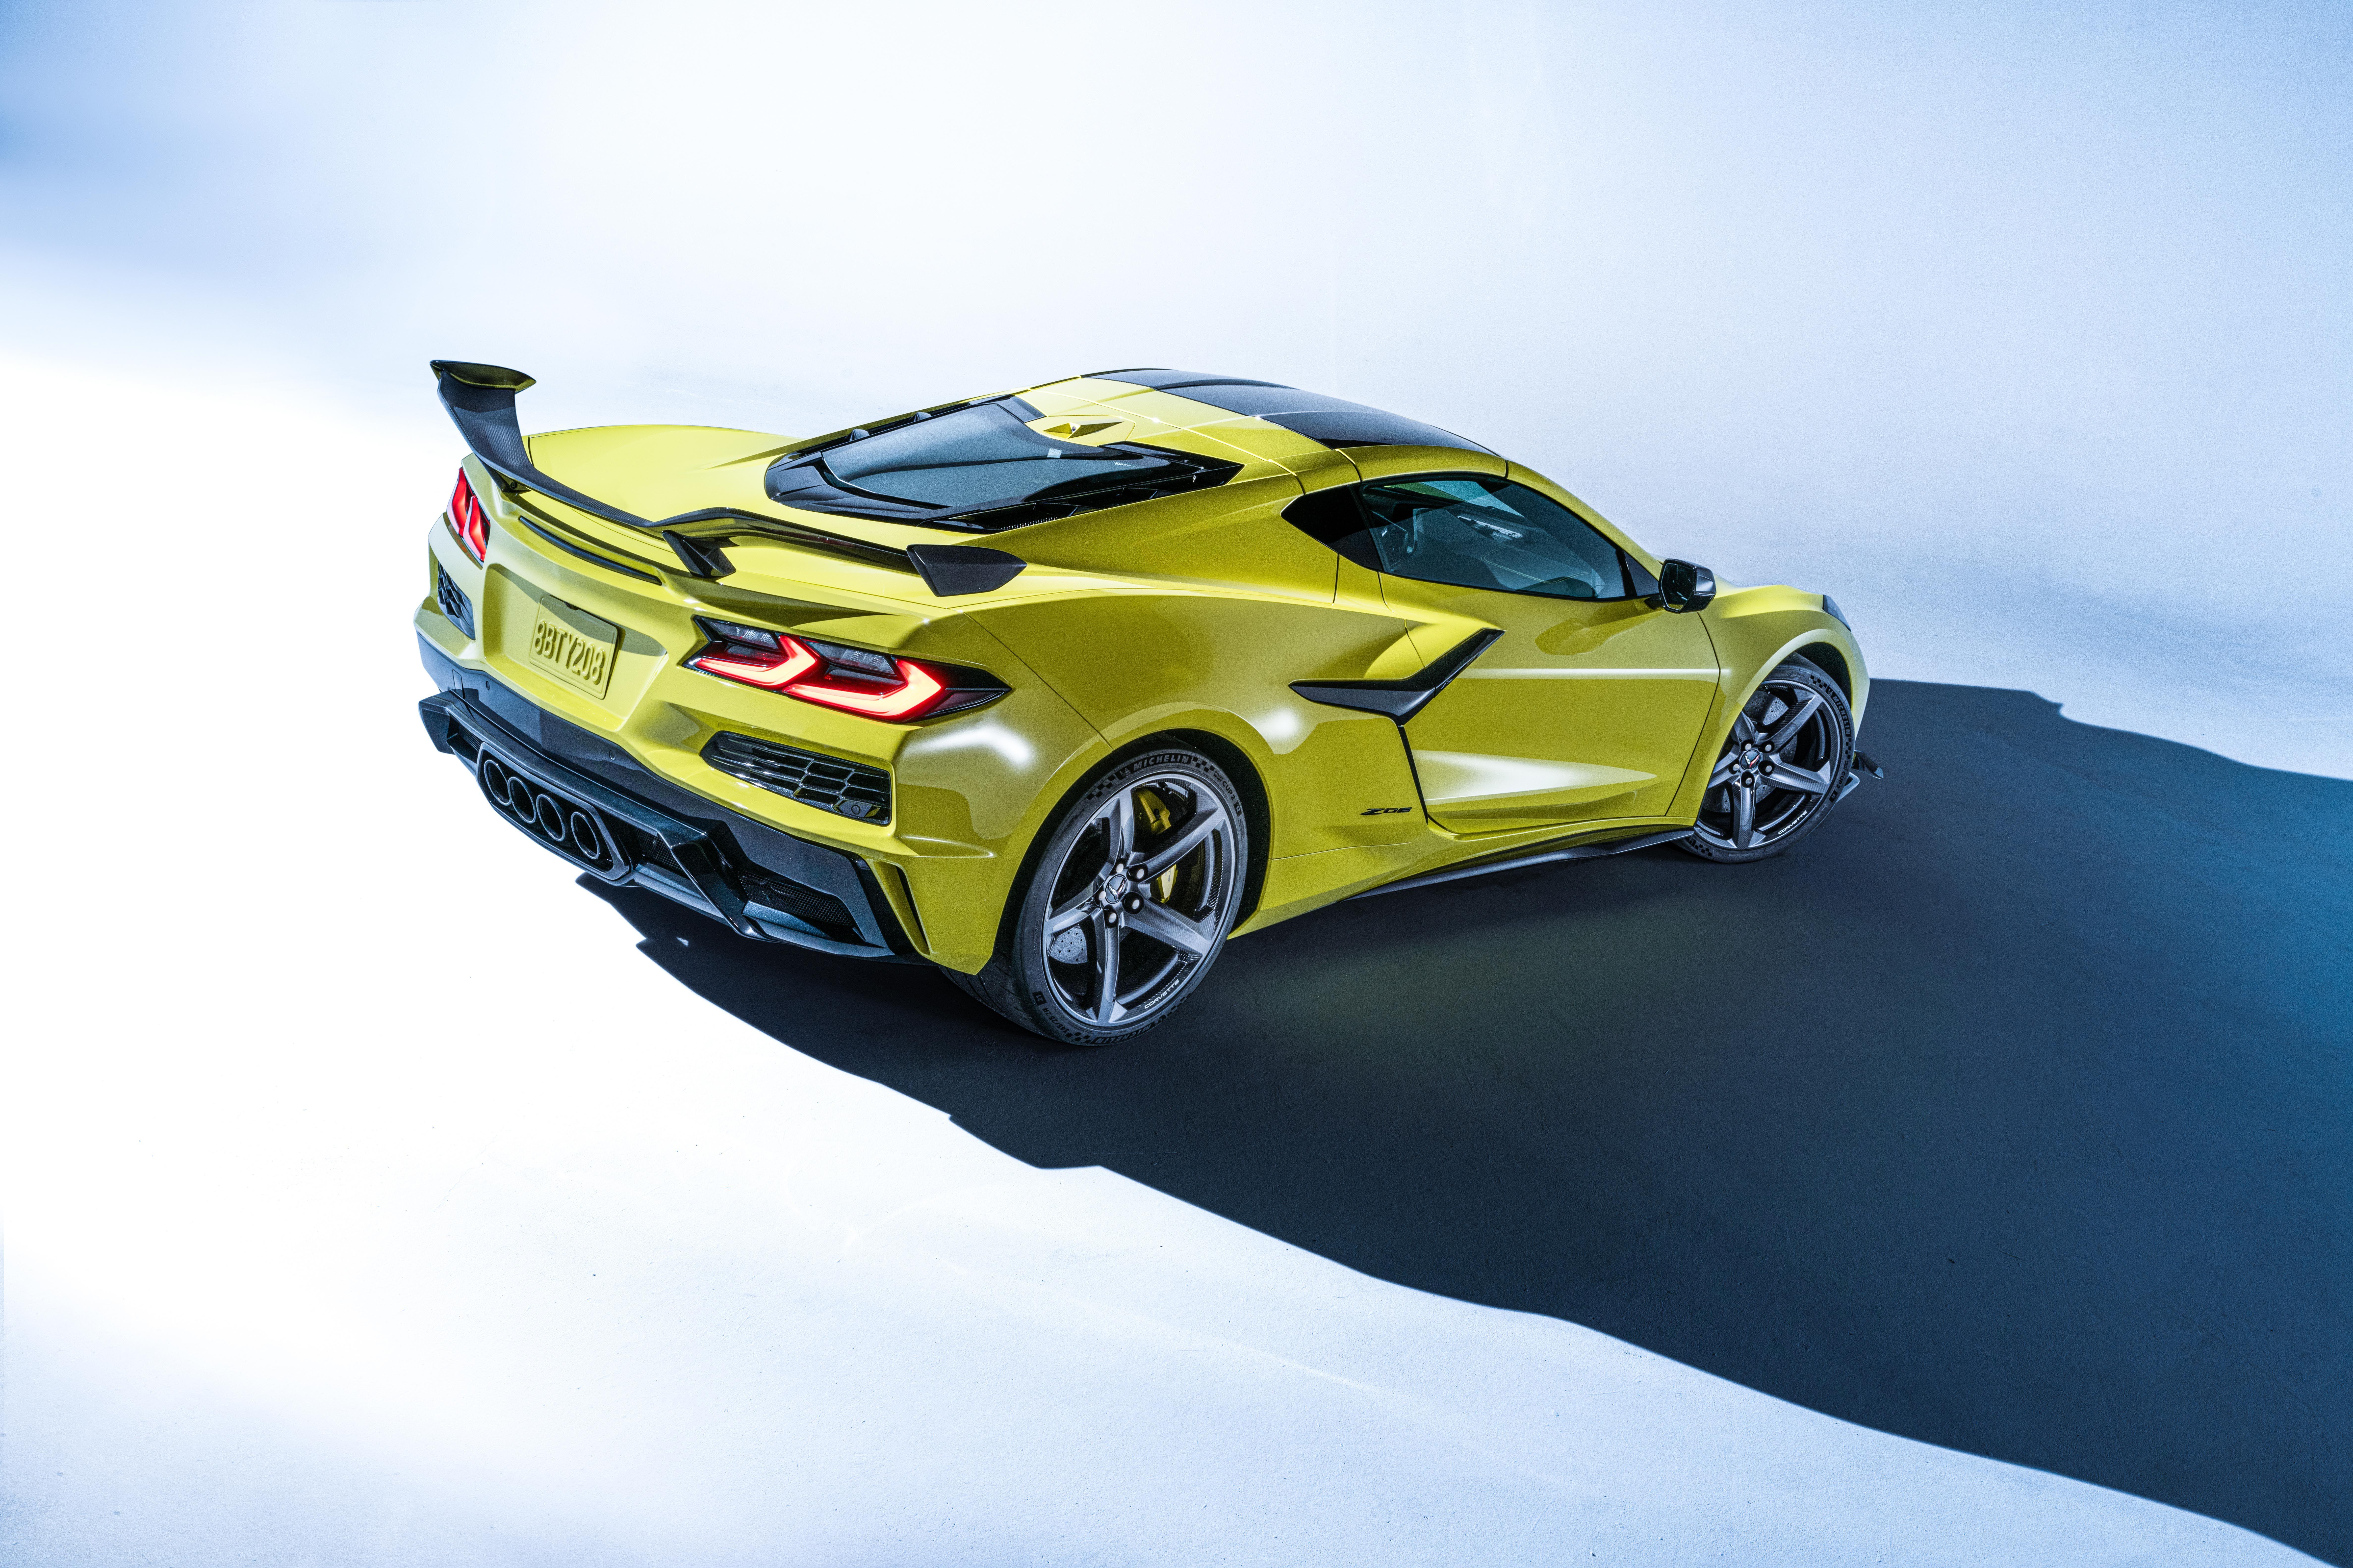 2023 Chevy Corvette Z06 Brings 670 HP of Naturally Aspirated Fury